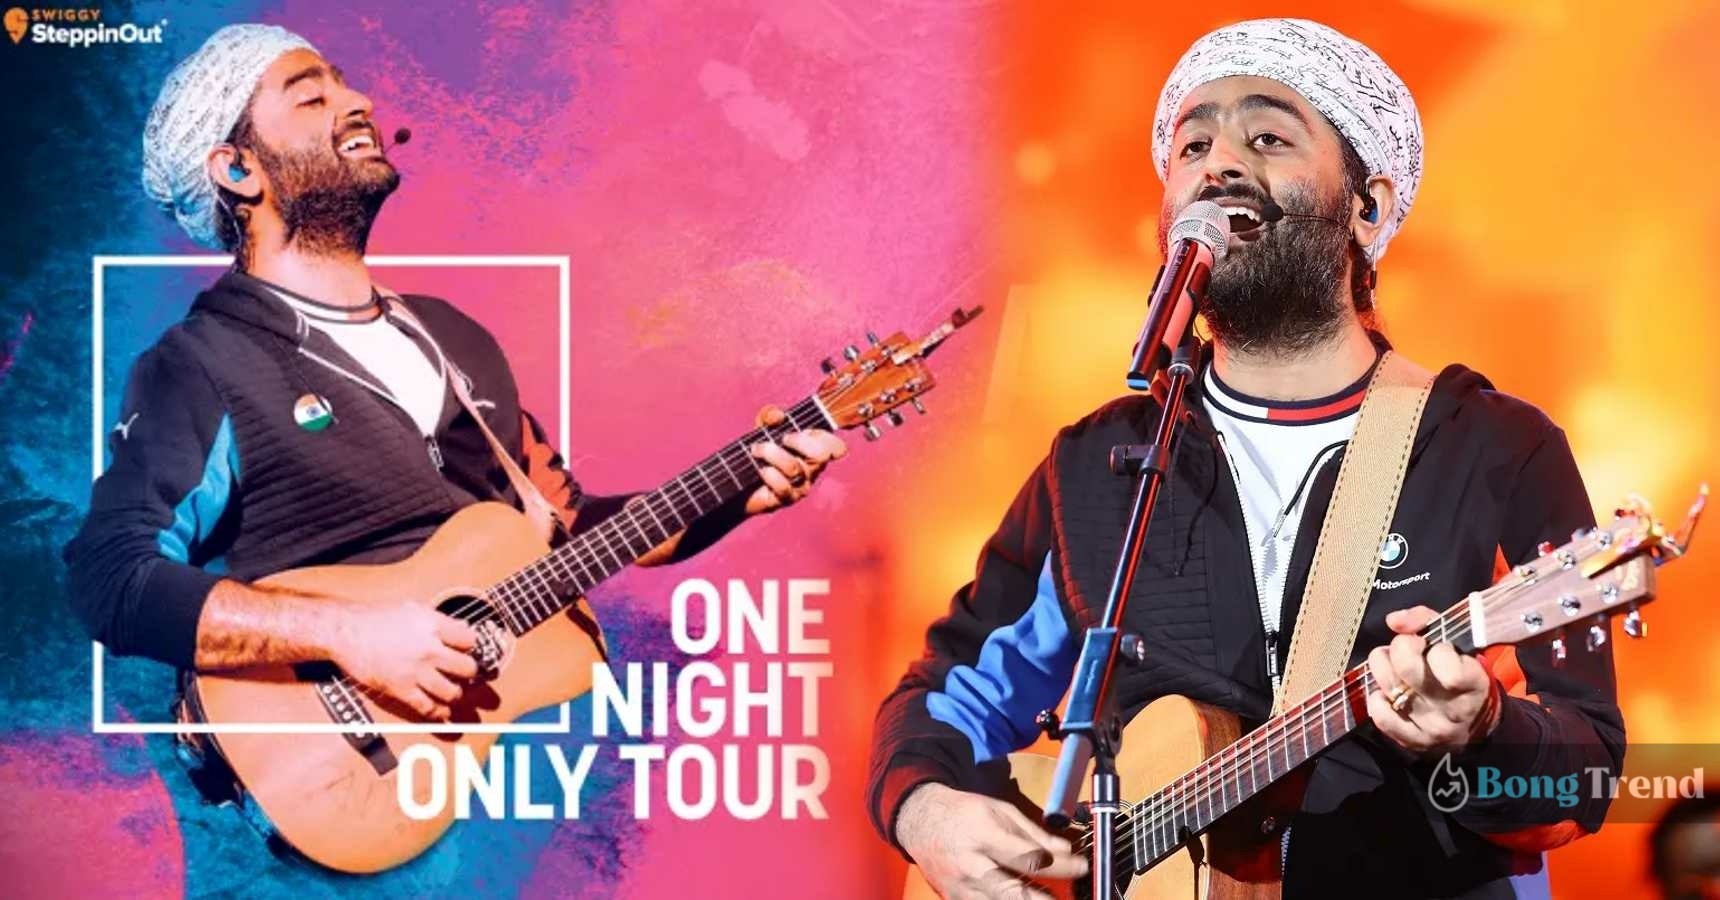 Arijit Singh Live consert in Kolkata Eco Park tick selling online for whooping 50000 rs